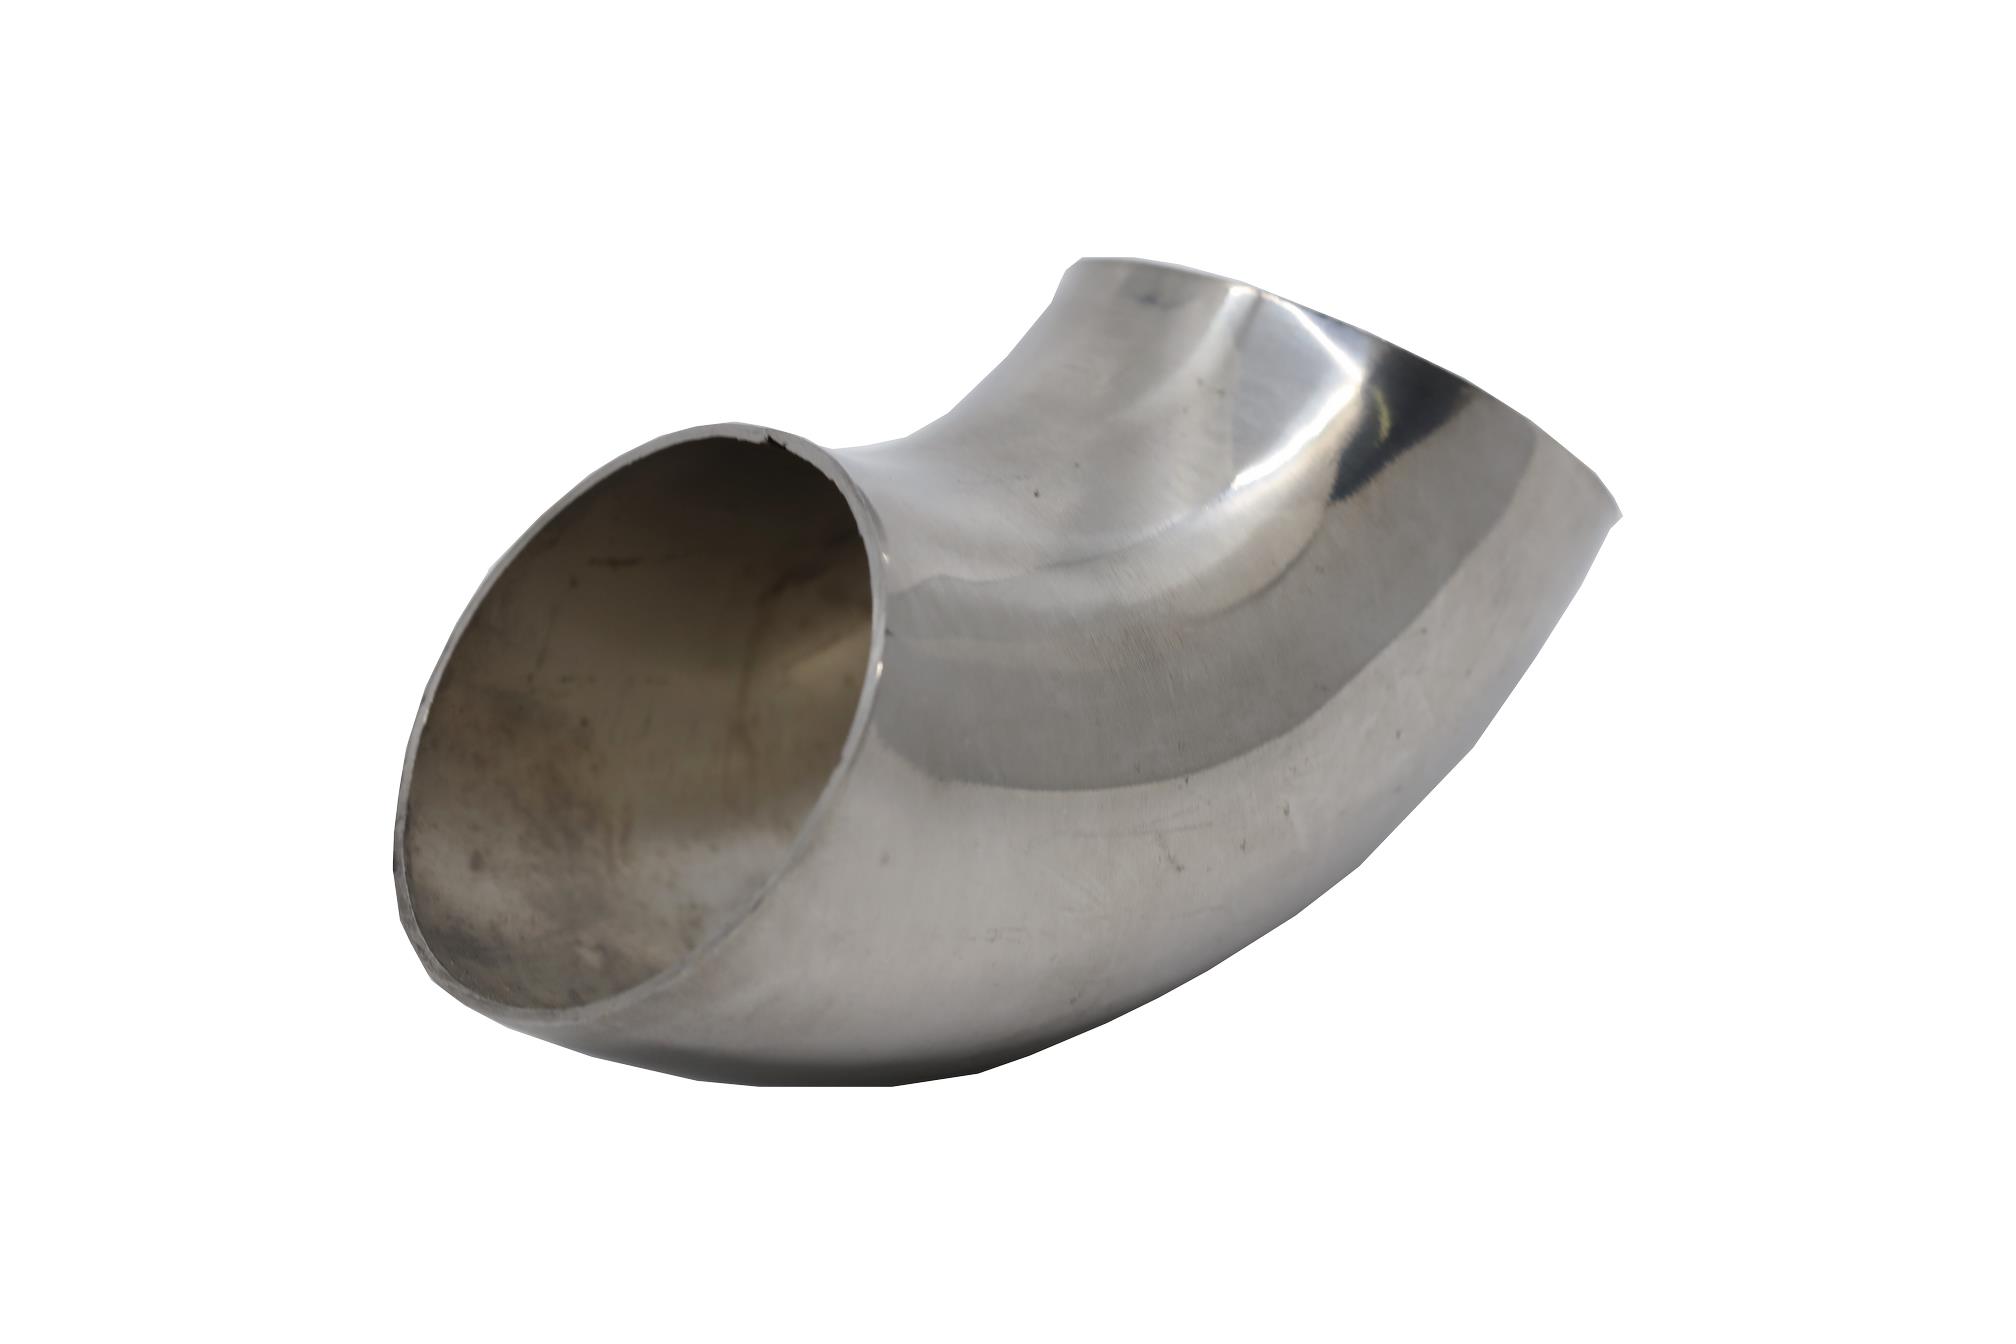 Buy Stainless Rail Pipe Elbow Connector 38.1mm 304SUS (EB13-381) Online | Qetaat.com | First construction & industrial platform in Bahrain